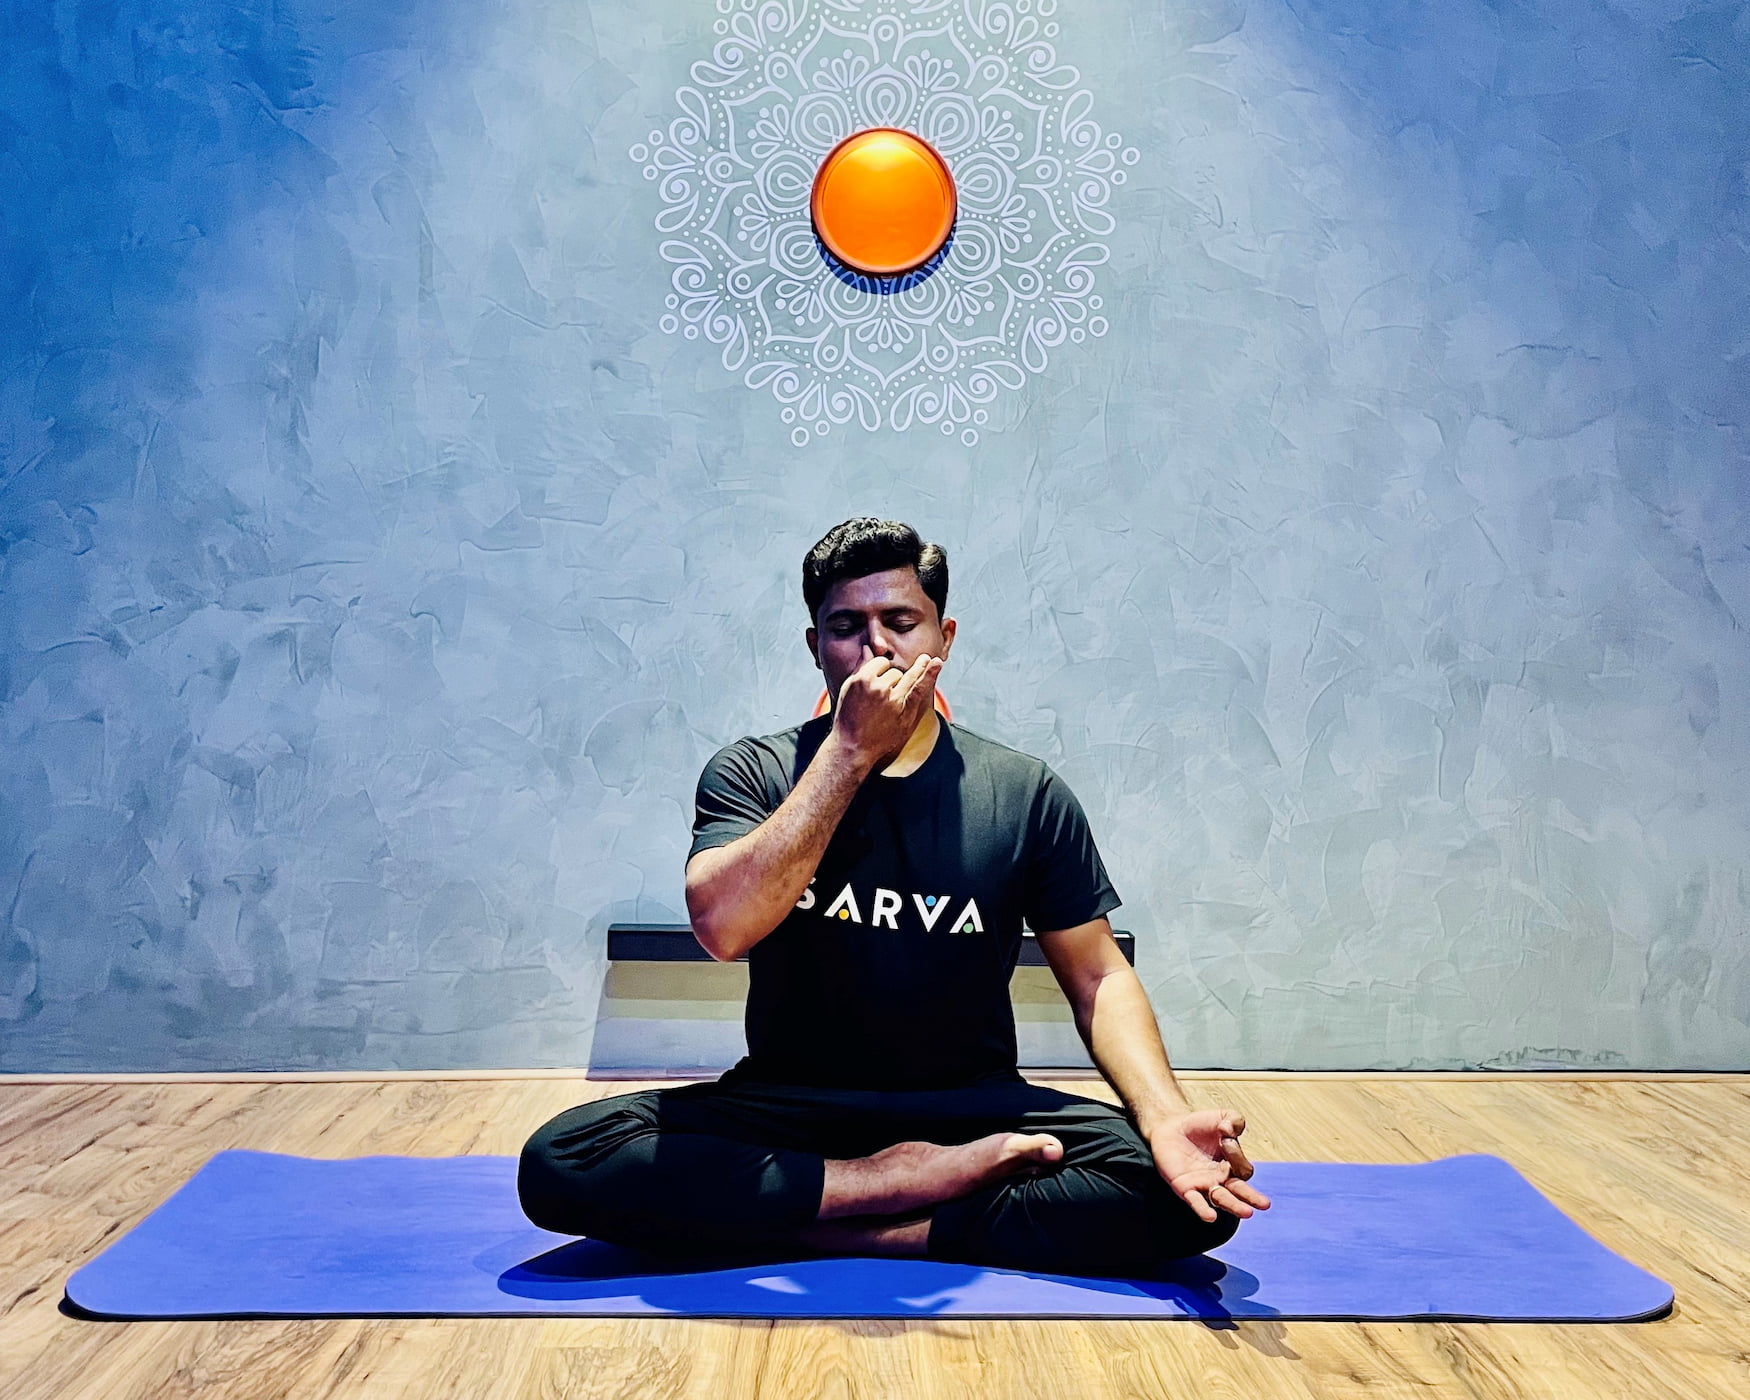 Tummee.com - Learn Bumble Bee Breath (Bhramari) Pranayam at  https://www.tummee.com/yoga-poses/bhramari-pranayama The vibrations created  with this form of breathing helps in relaxing the entire body. Visit  https://www.tummee.com to view 3000+ yoga poses and